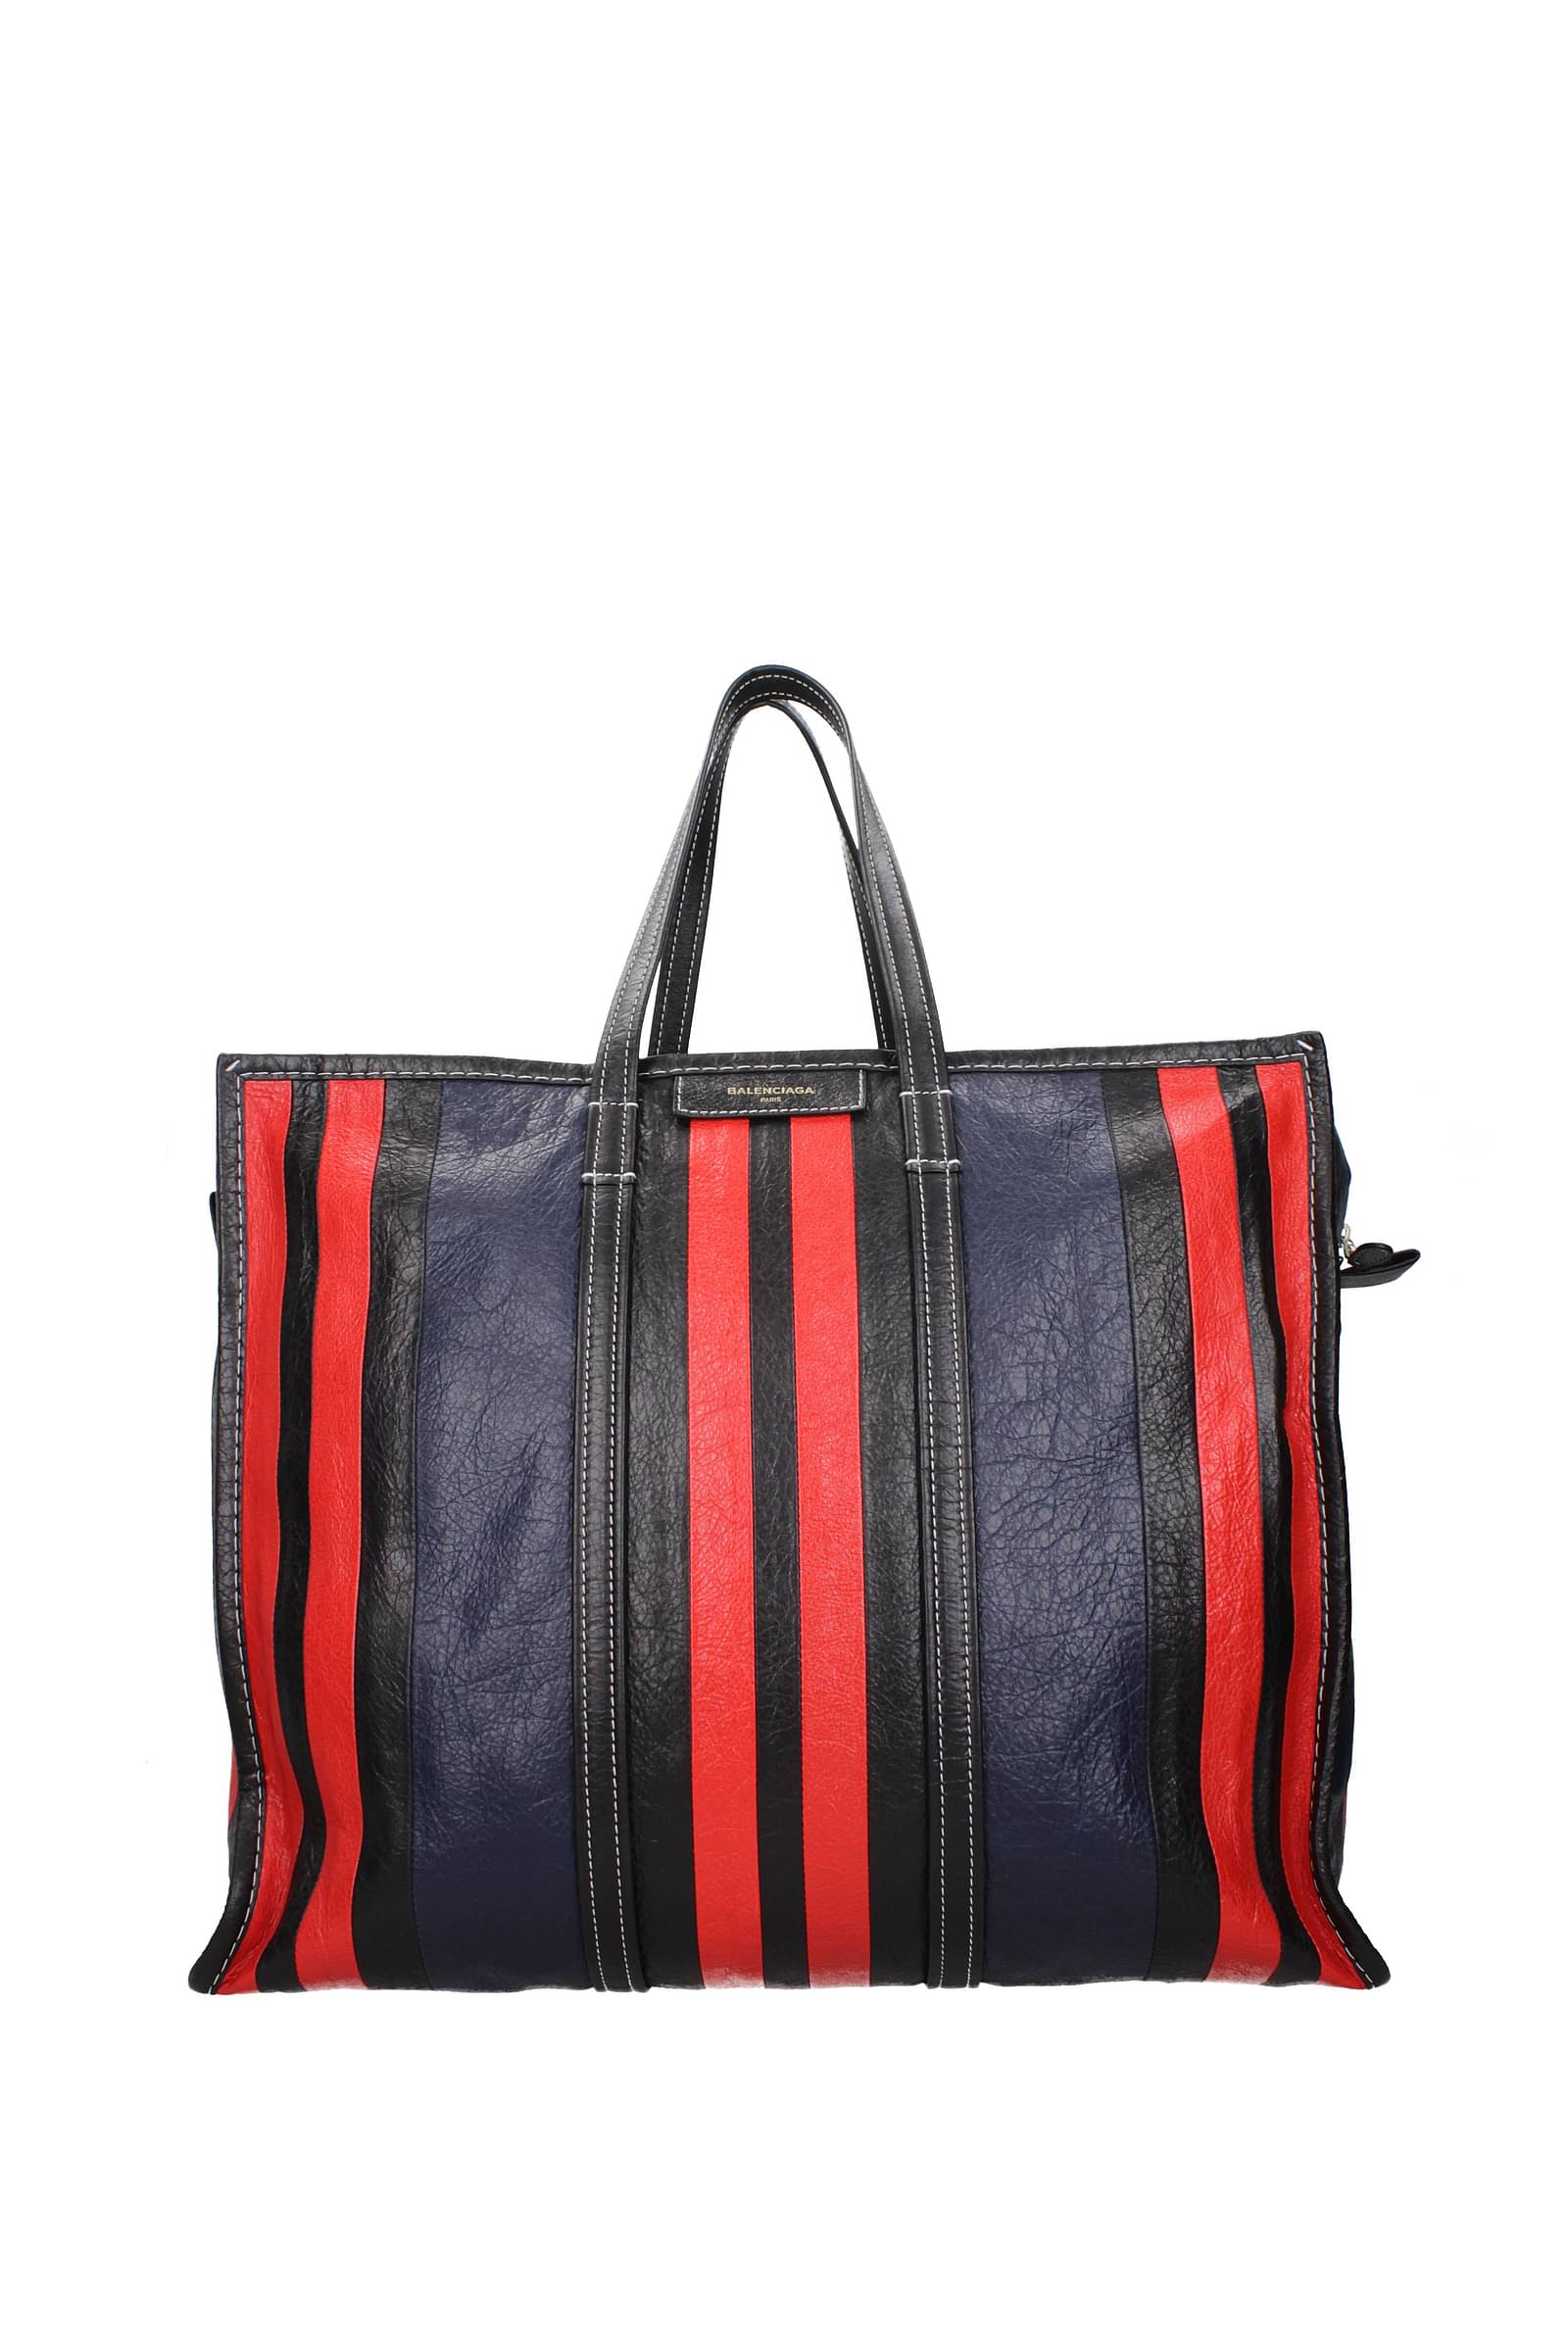 Gucci Red/White/Blue Striped Canvas Drawstring Backpack Bag - Yoogi's Closet